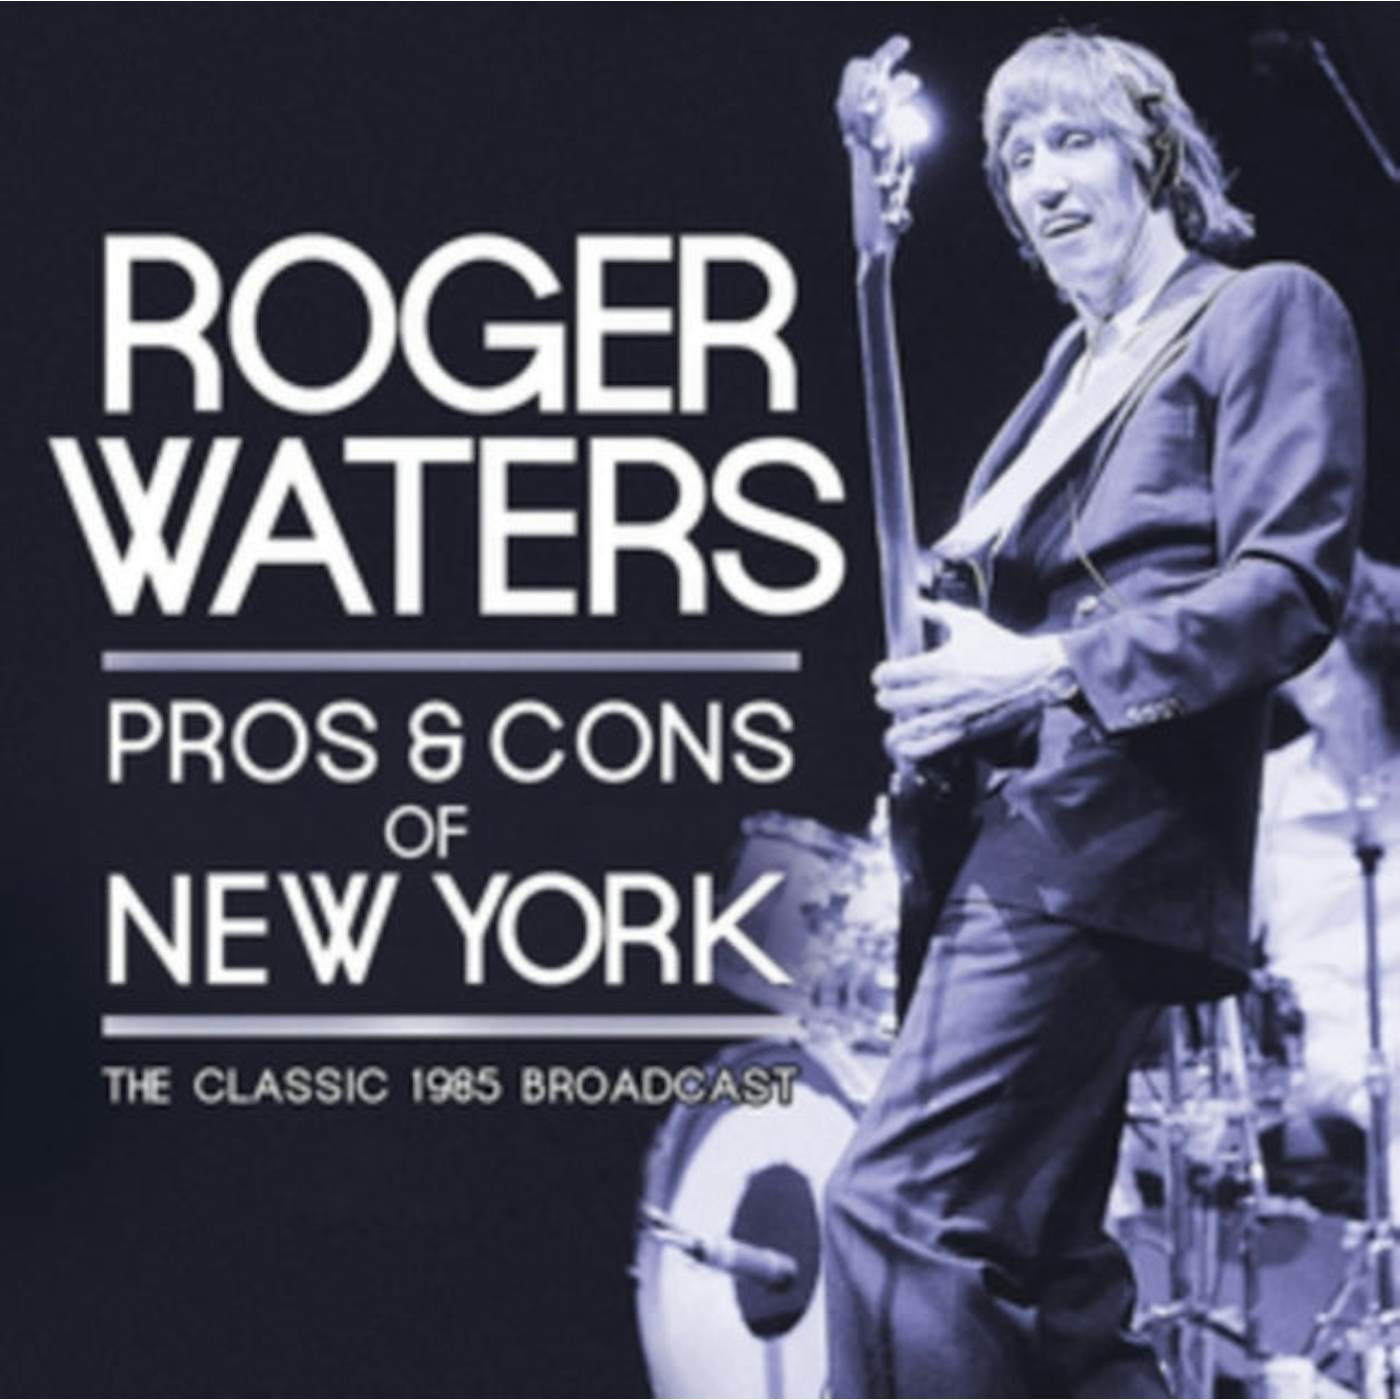 Roger Waters CD - Pros & Cons Of New York